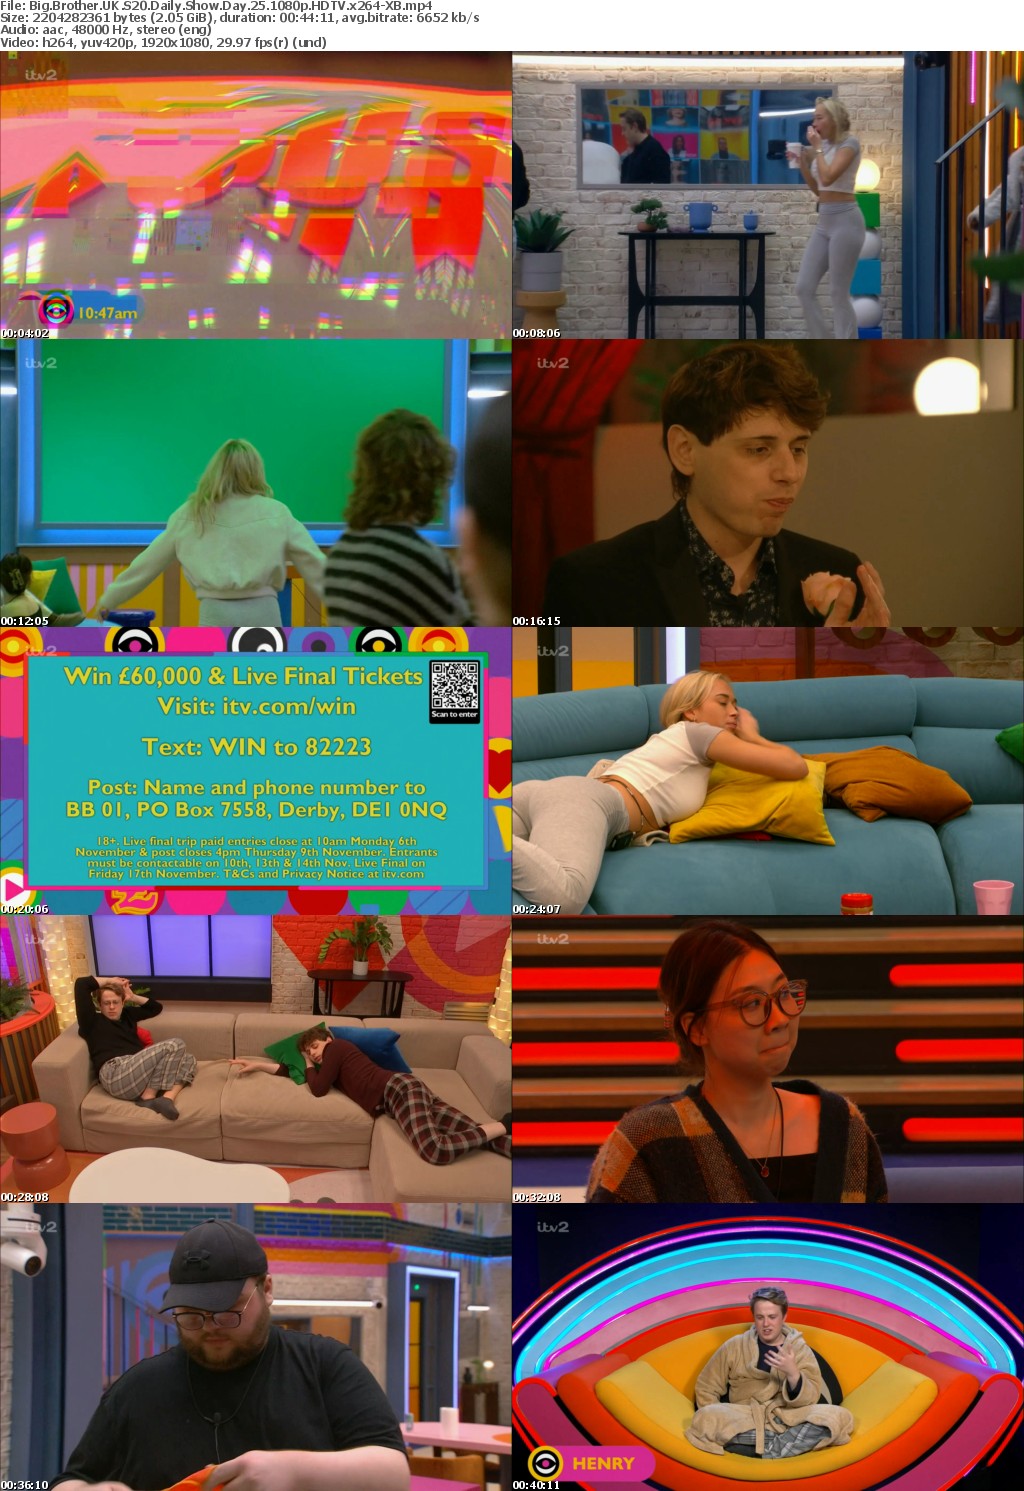 Big Brother UK S20 Daily Show Day 25 1080p HDTV x264-XB